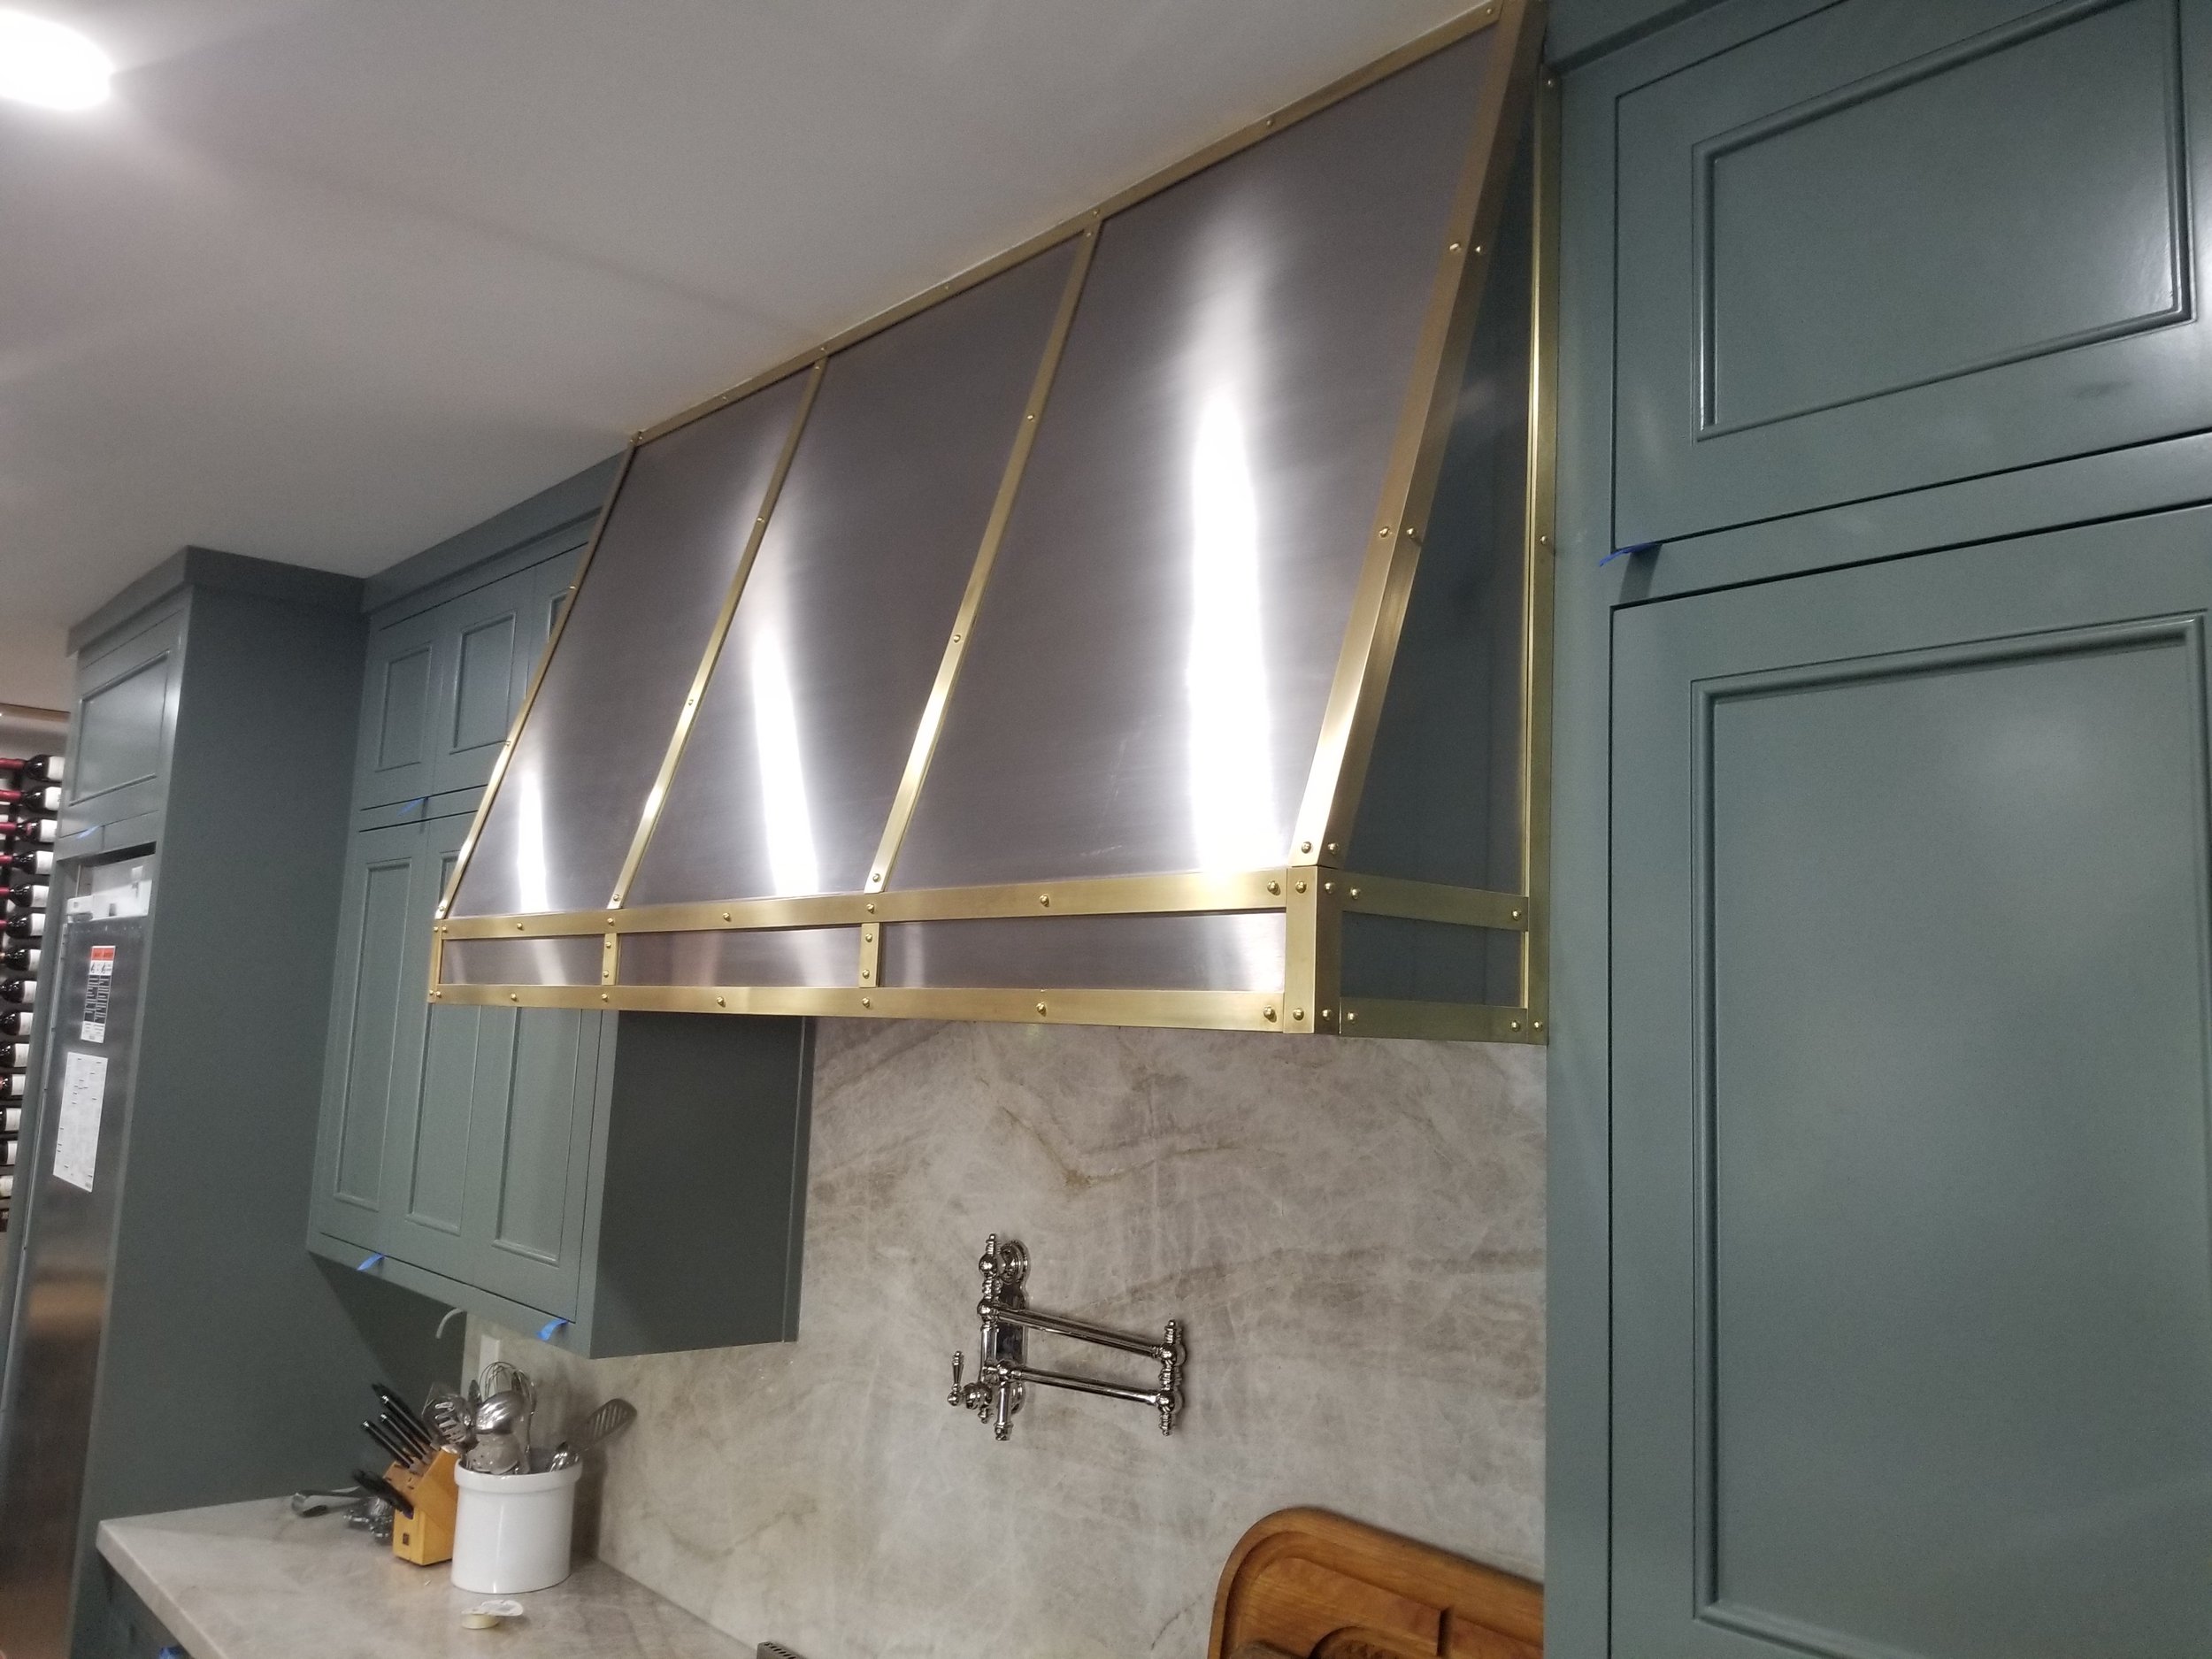 STAINLESS STEEL RANGE HOOD WITH BRASS STRAPS AND RIVETS